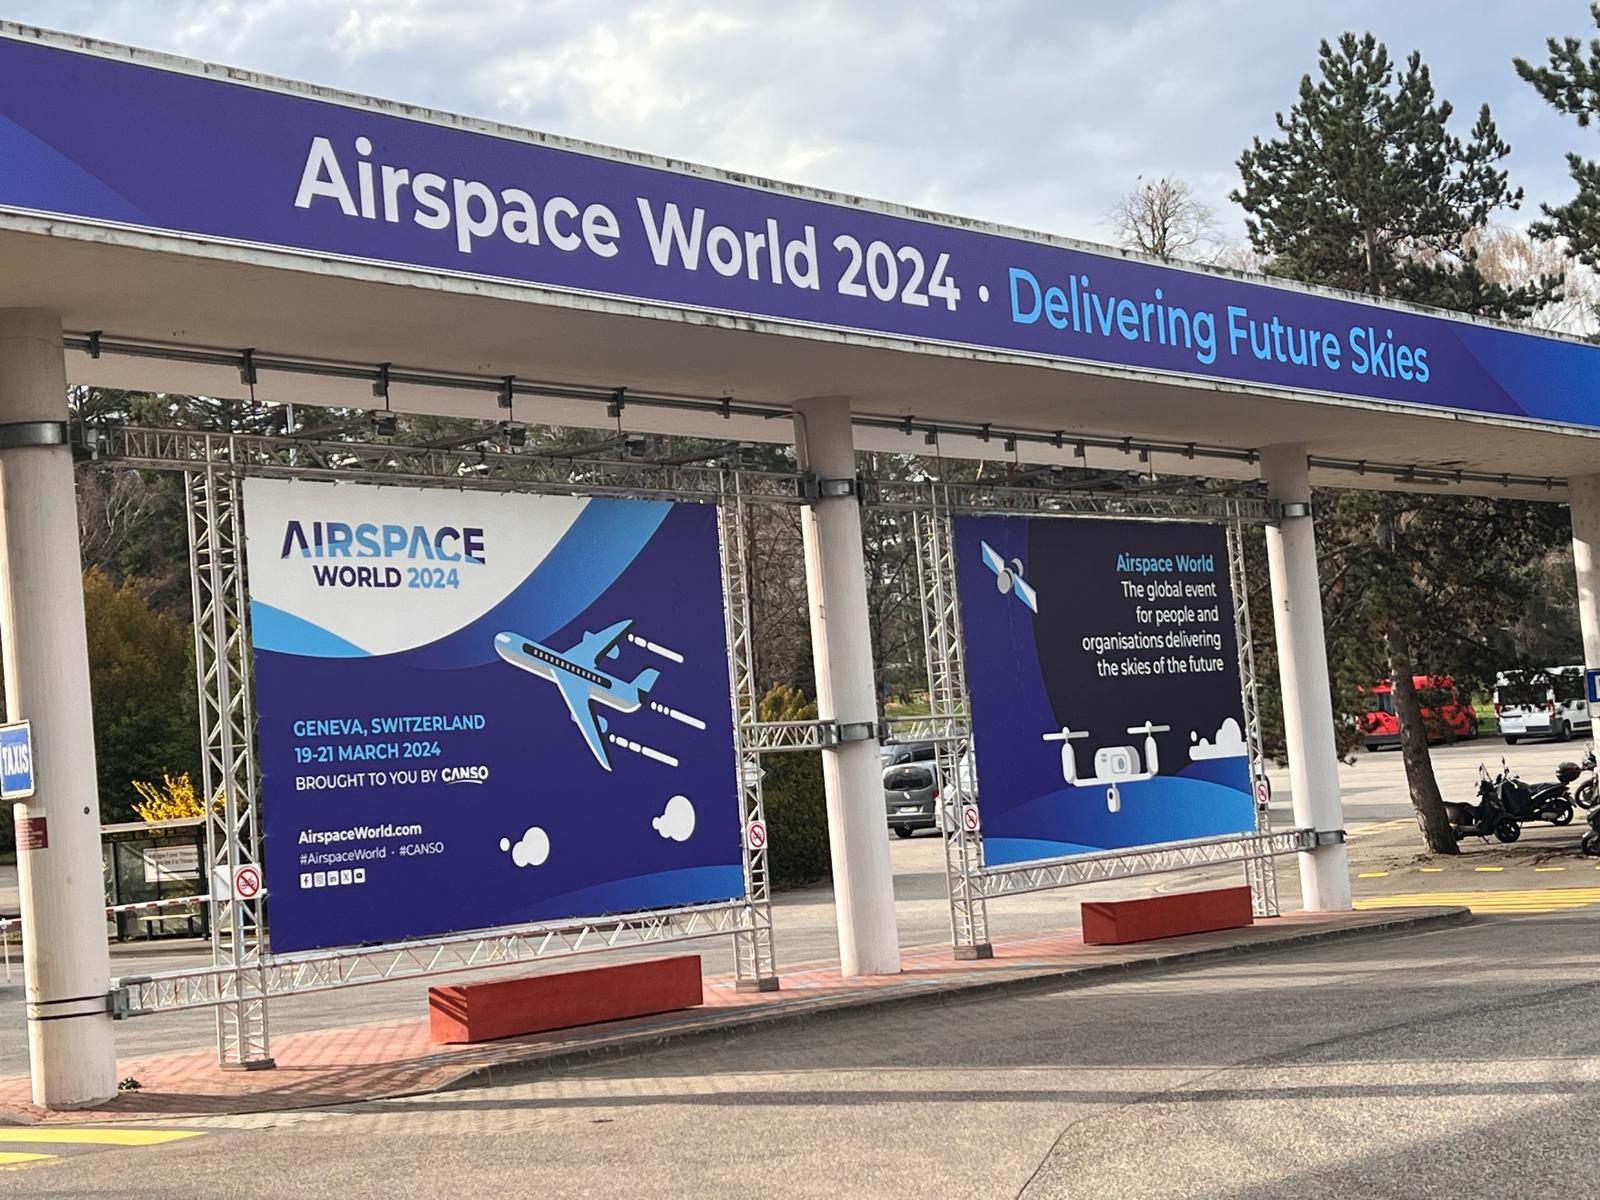 Airspace World 2024 taking shape